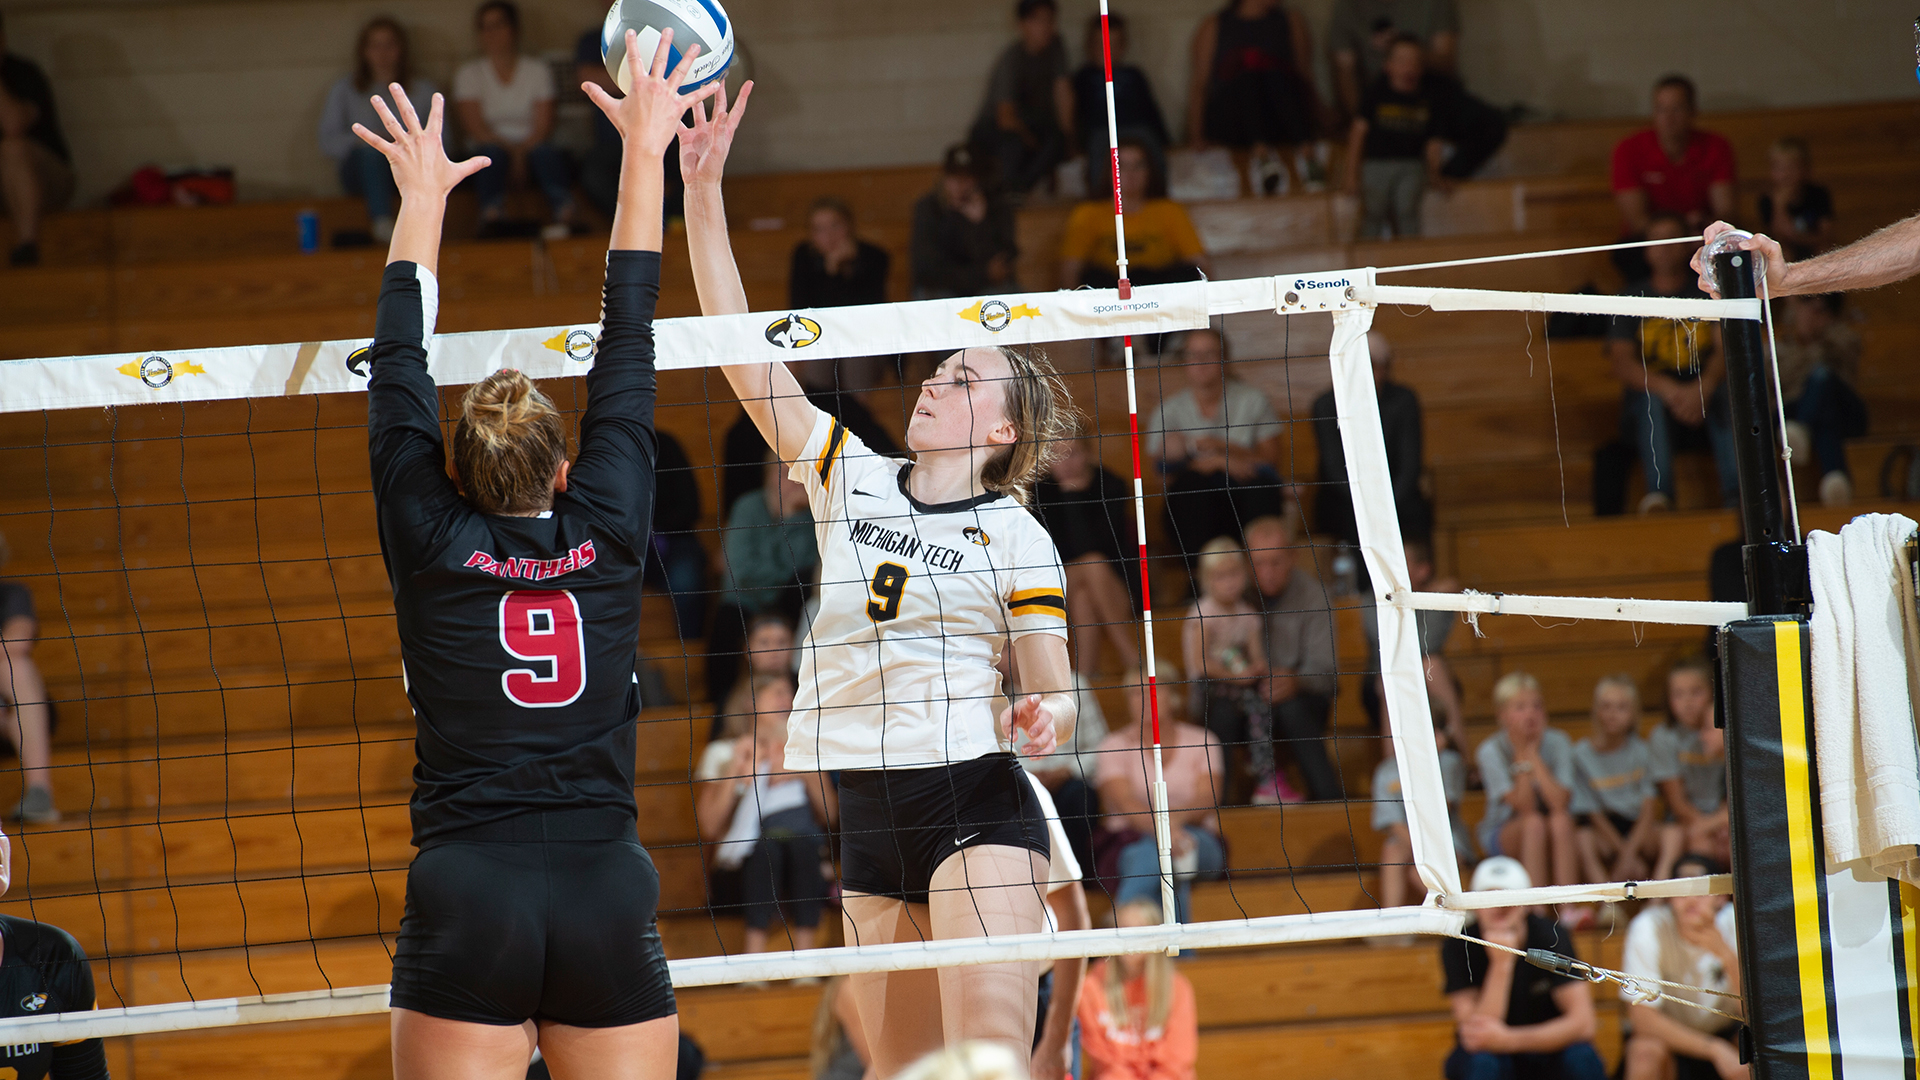 PREVIEW: Volleyball begins postseason at Wayne State